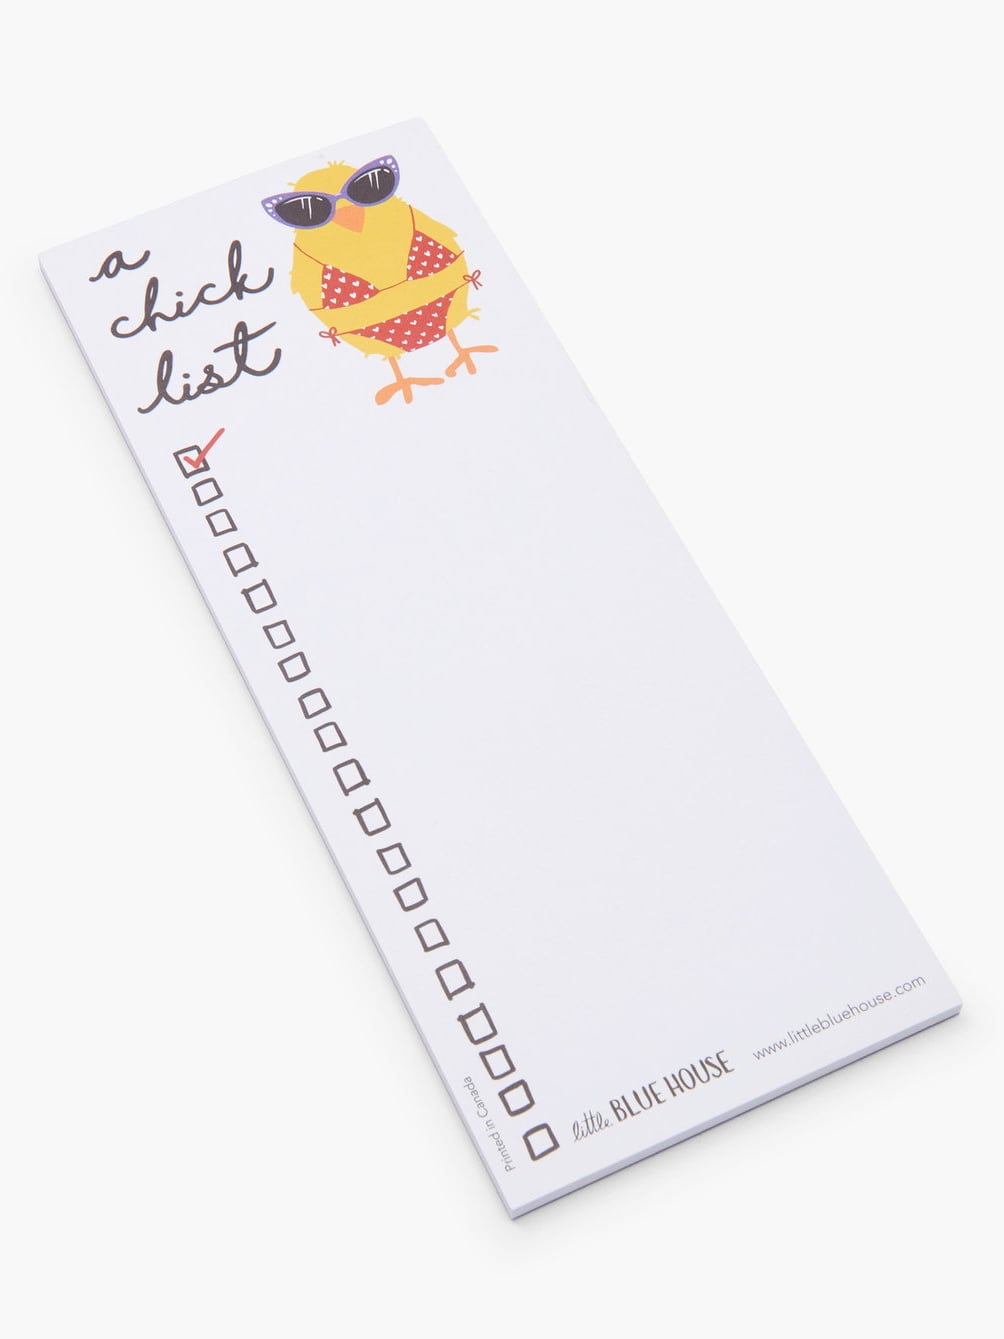 NEW Lady Jayne Ltd HONEY DO Magnetic note pad & pen Bee lovers To Do list 